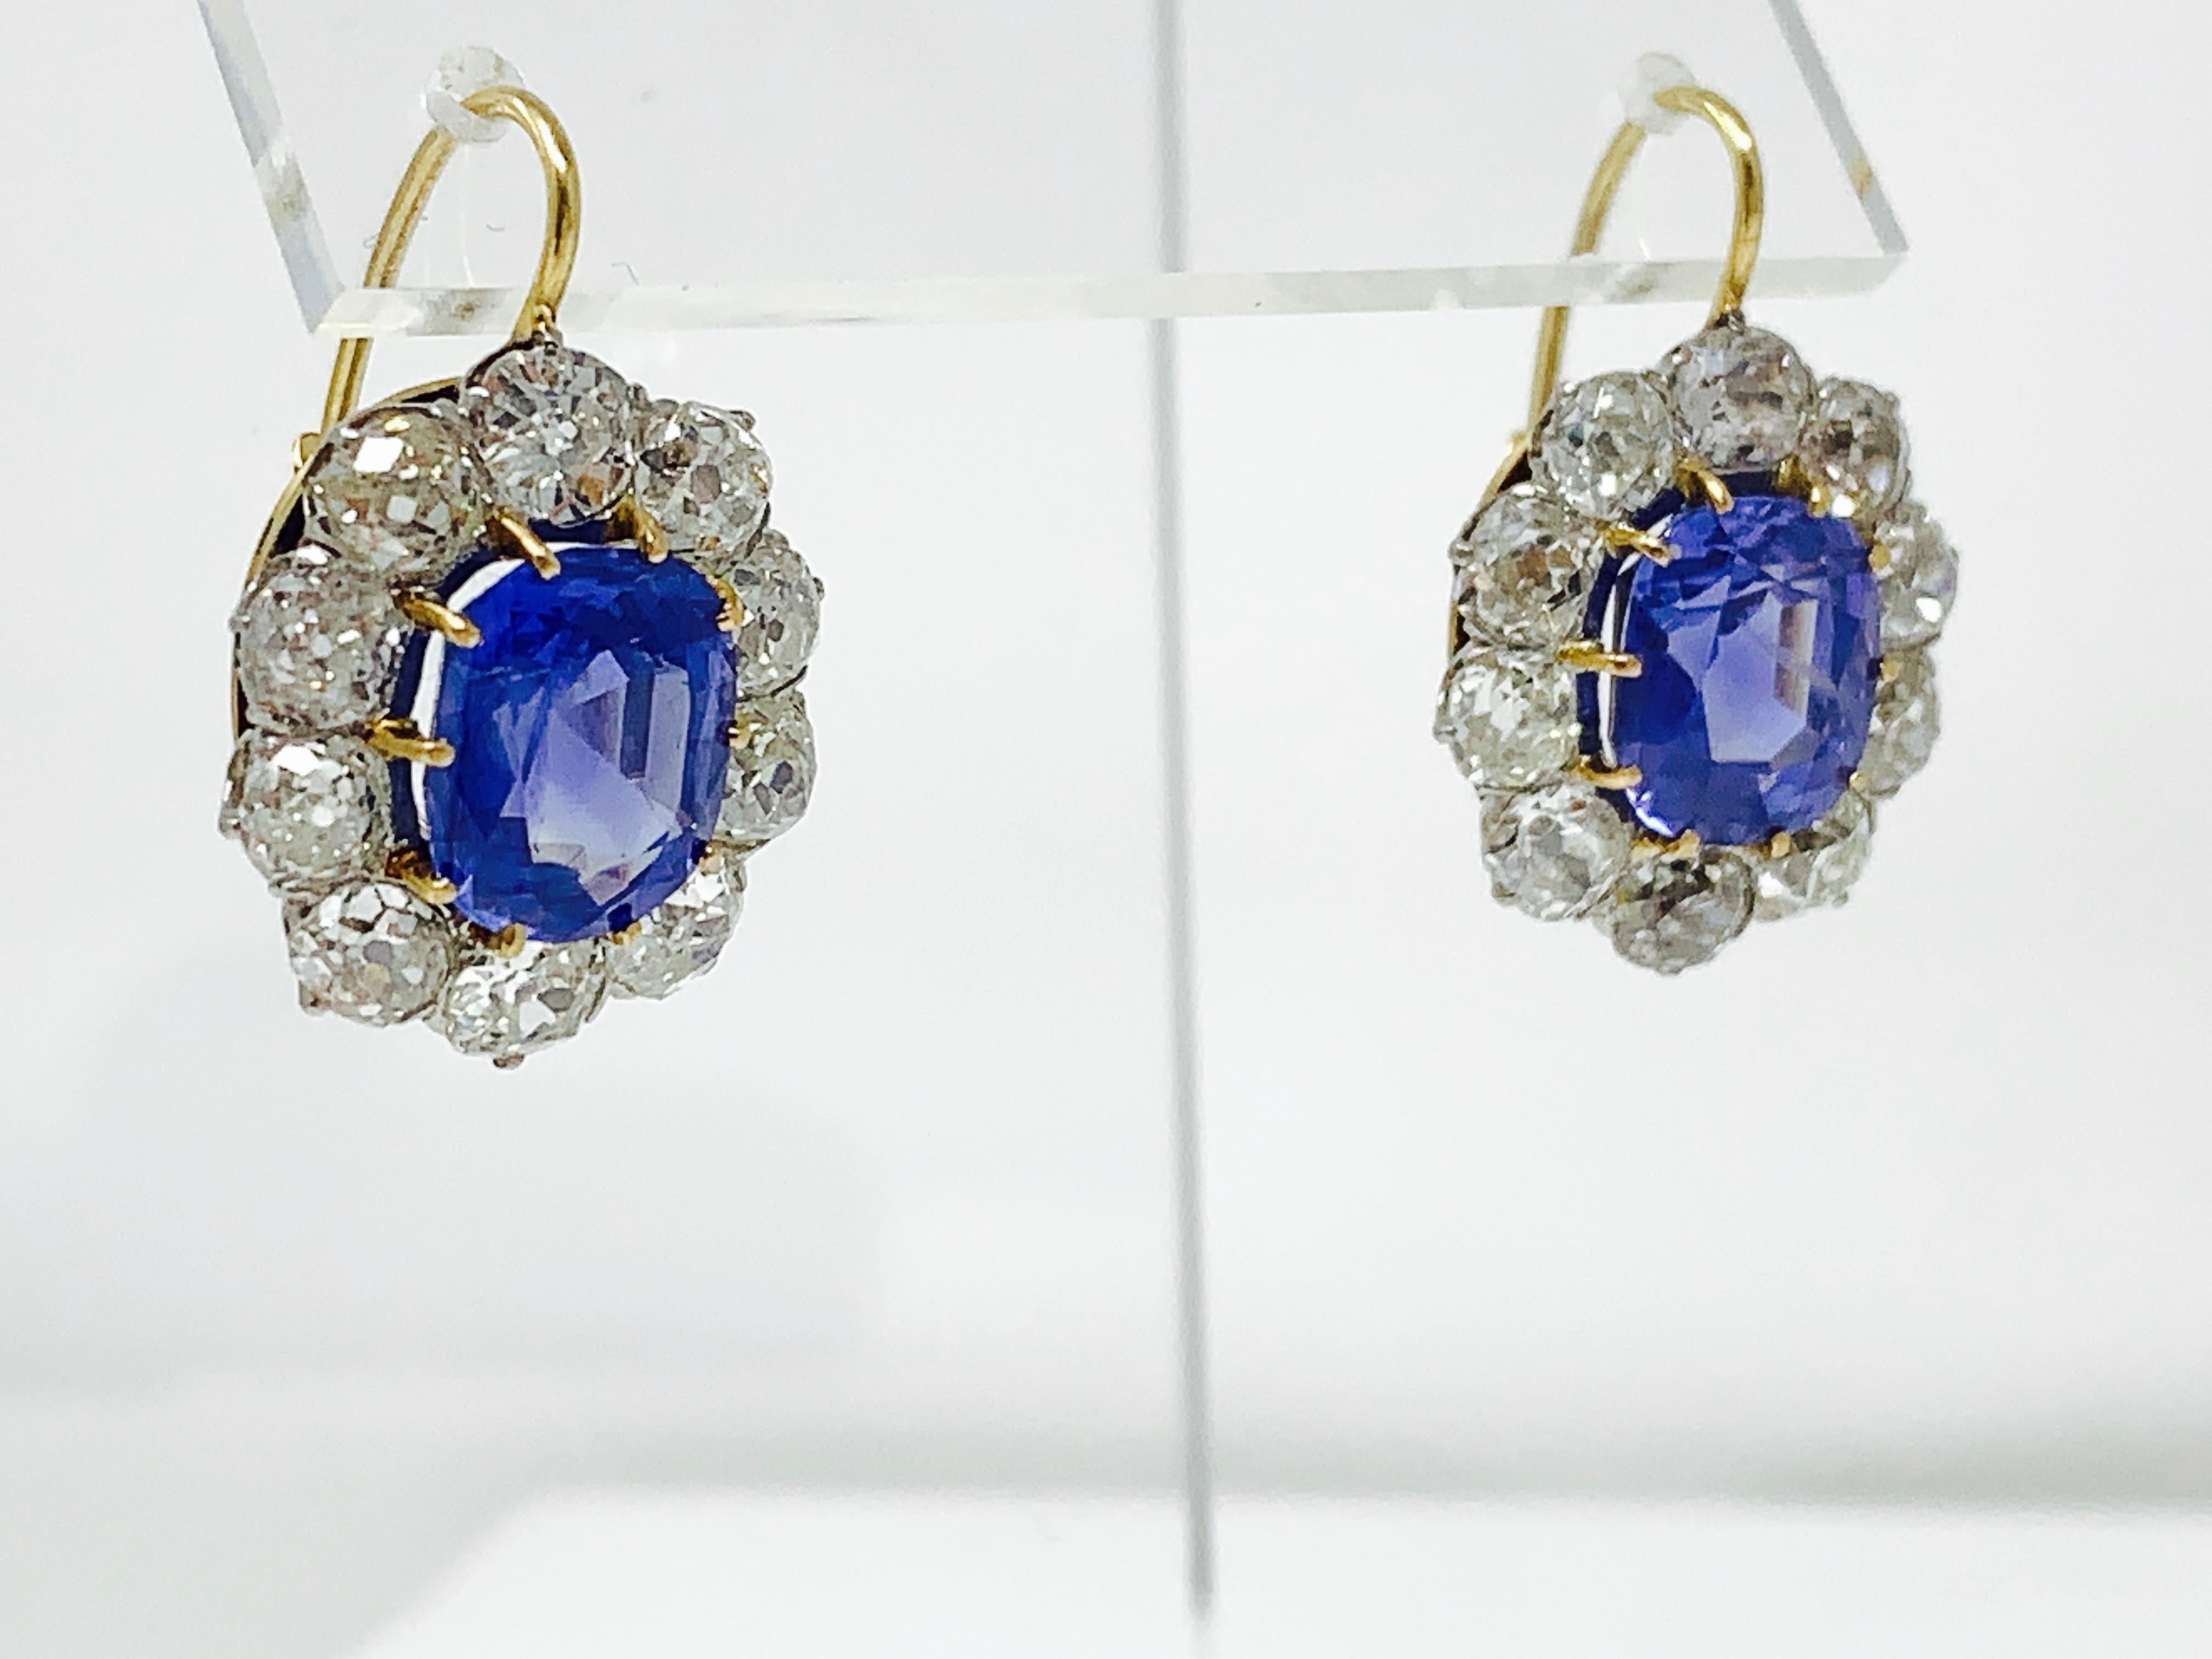 Moguldiam Inc Vintage Ceylon Blue Sapphire And Diamond Dangle earrings In 18K Yellow Gold And Platinum. 
Blue Sapphire Weight : 8 carat 
Diamond Weight : 7 carat 
measurements : 1 inch long 
metal : 18 k yellow gold and platinum 
Certificate : AGL